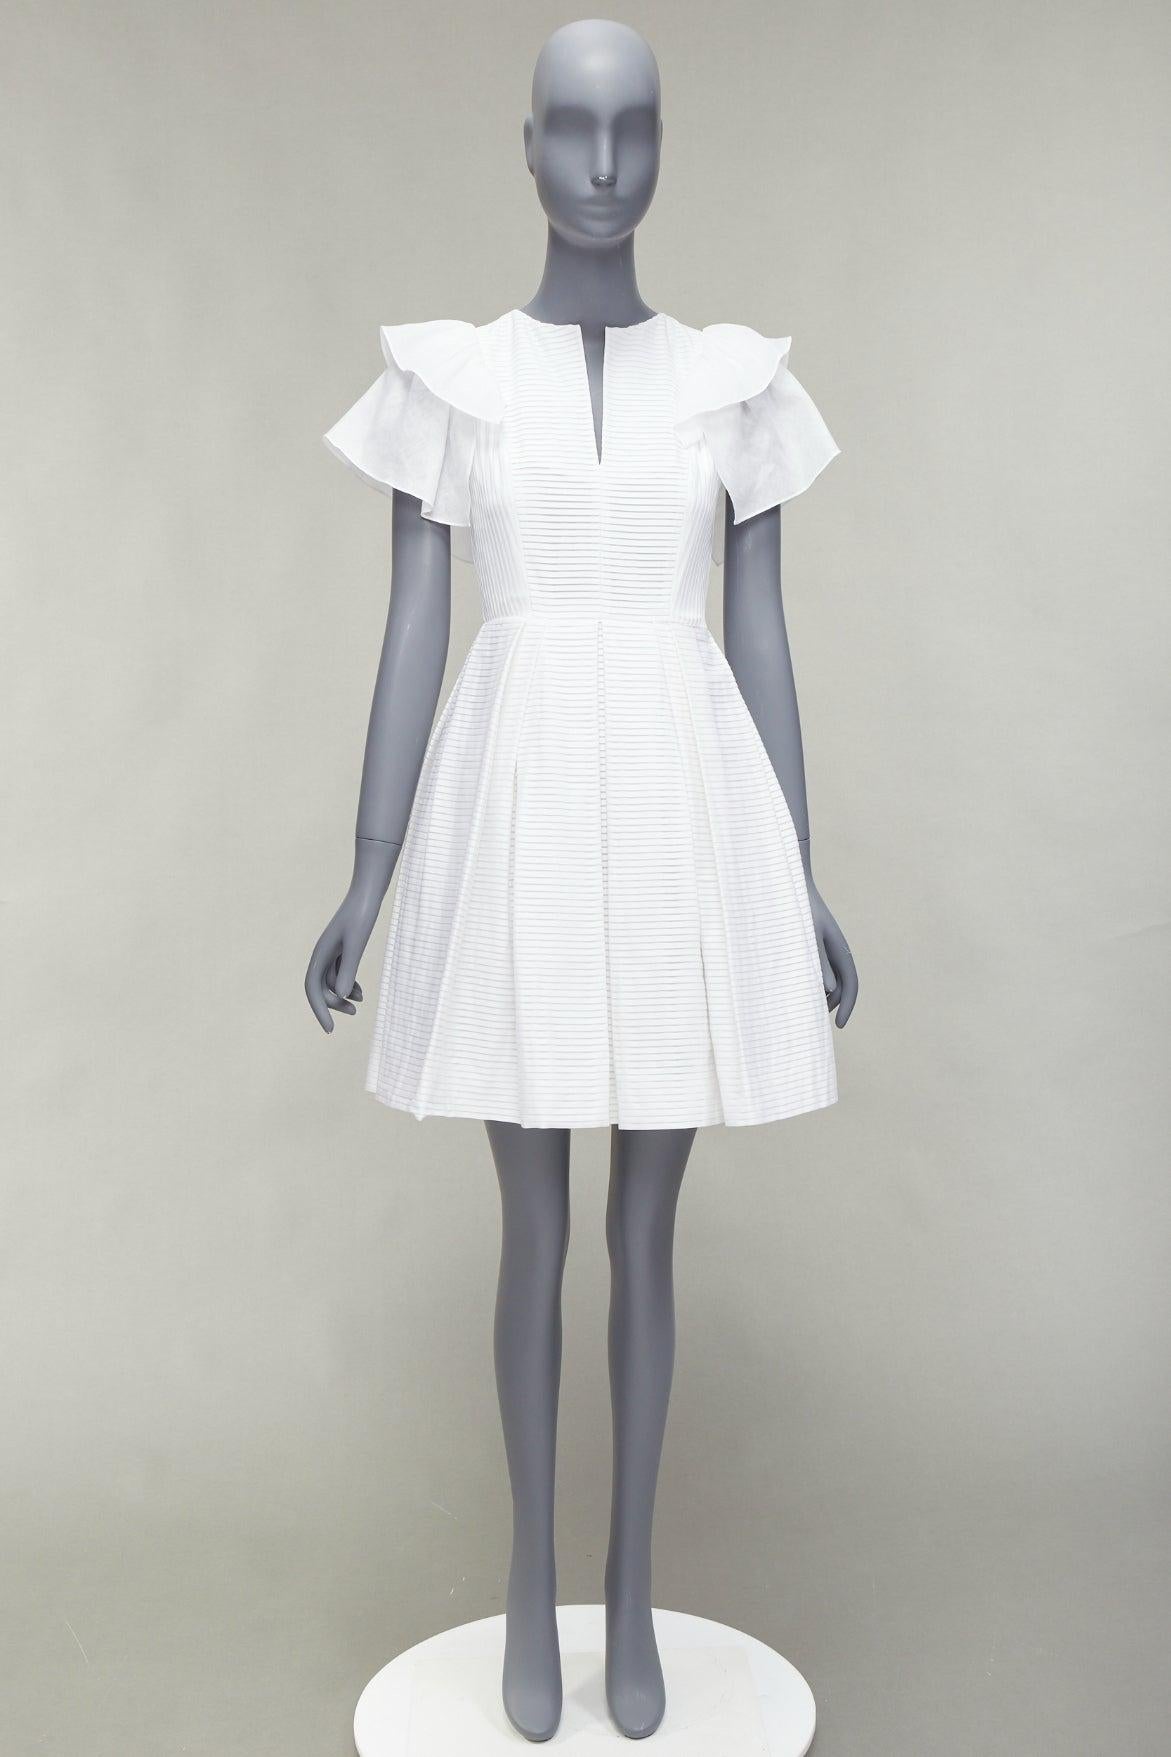 DICE KAYEK white pleated cotton ruffle sleeve fit flared cocktail dress FR34 XS
Reference: AAWC/A01147
Brand: Dice Kayek
Material: Cotton
Color: White
Pattern: Solid
Closure: Zip
Lining: White Fabric
Extra Details: Side zip.
Made in: